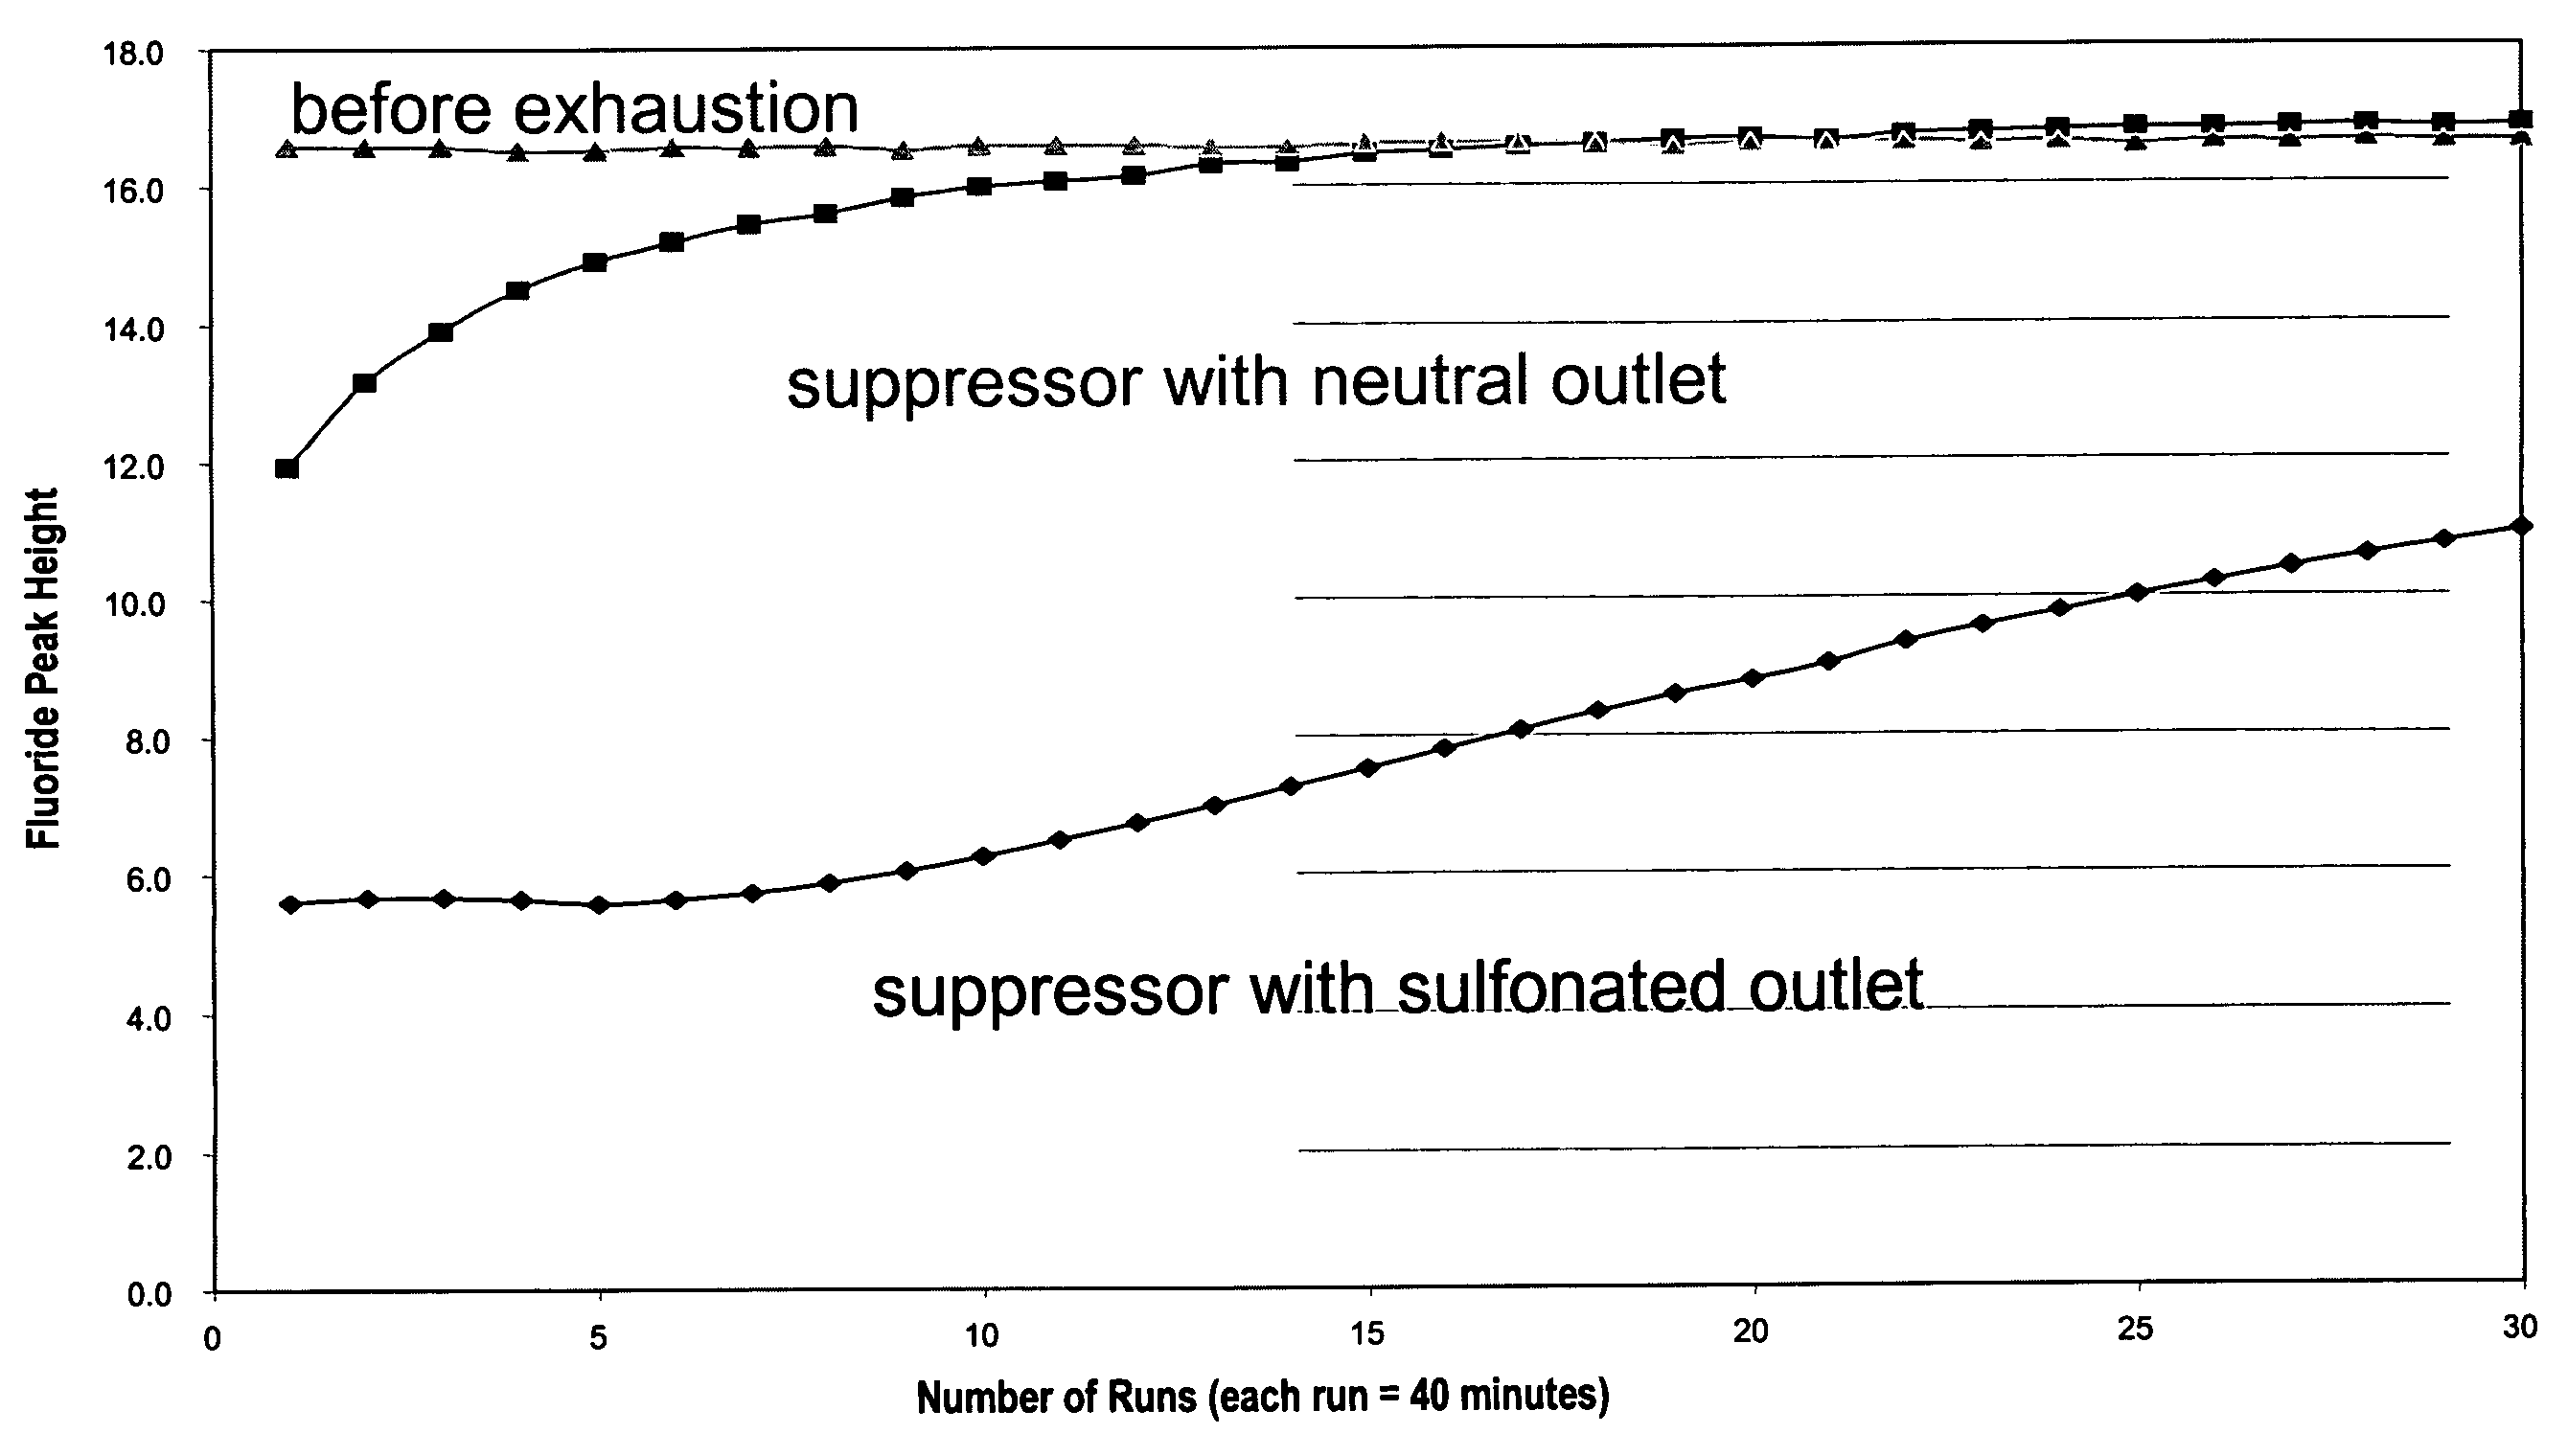 Membrane suppressor with an outlet substantially non-retentive for ionic species